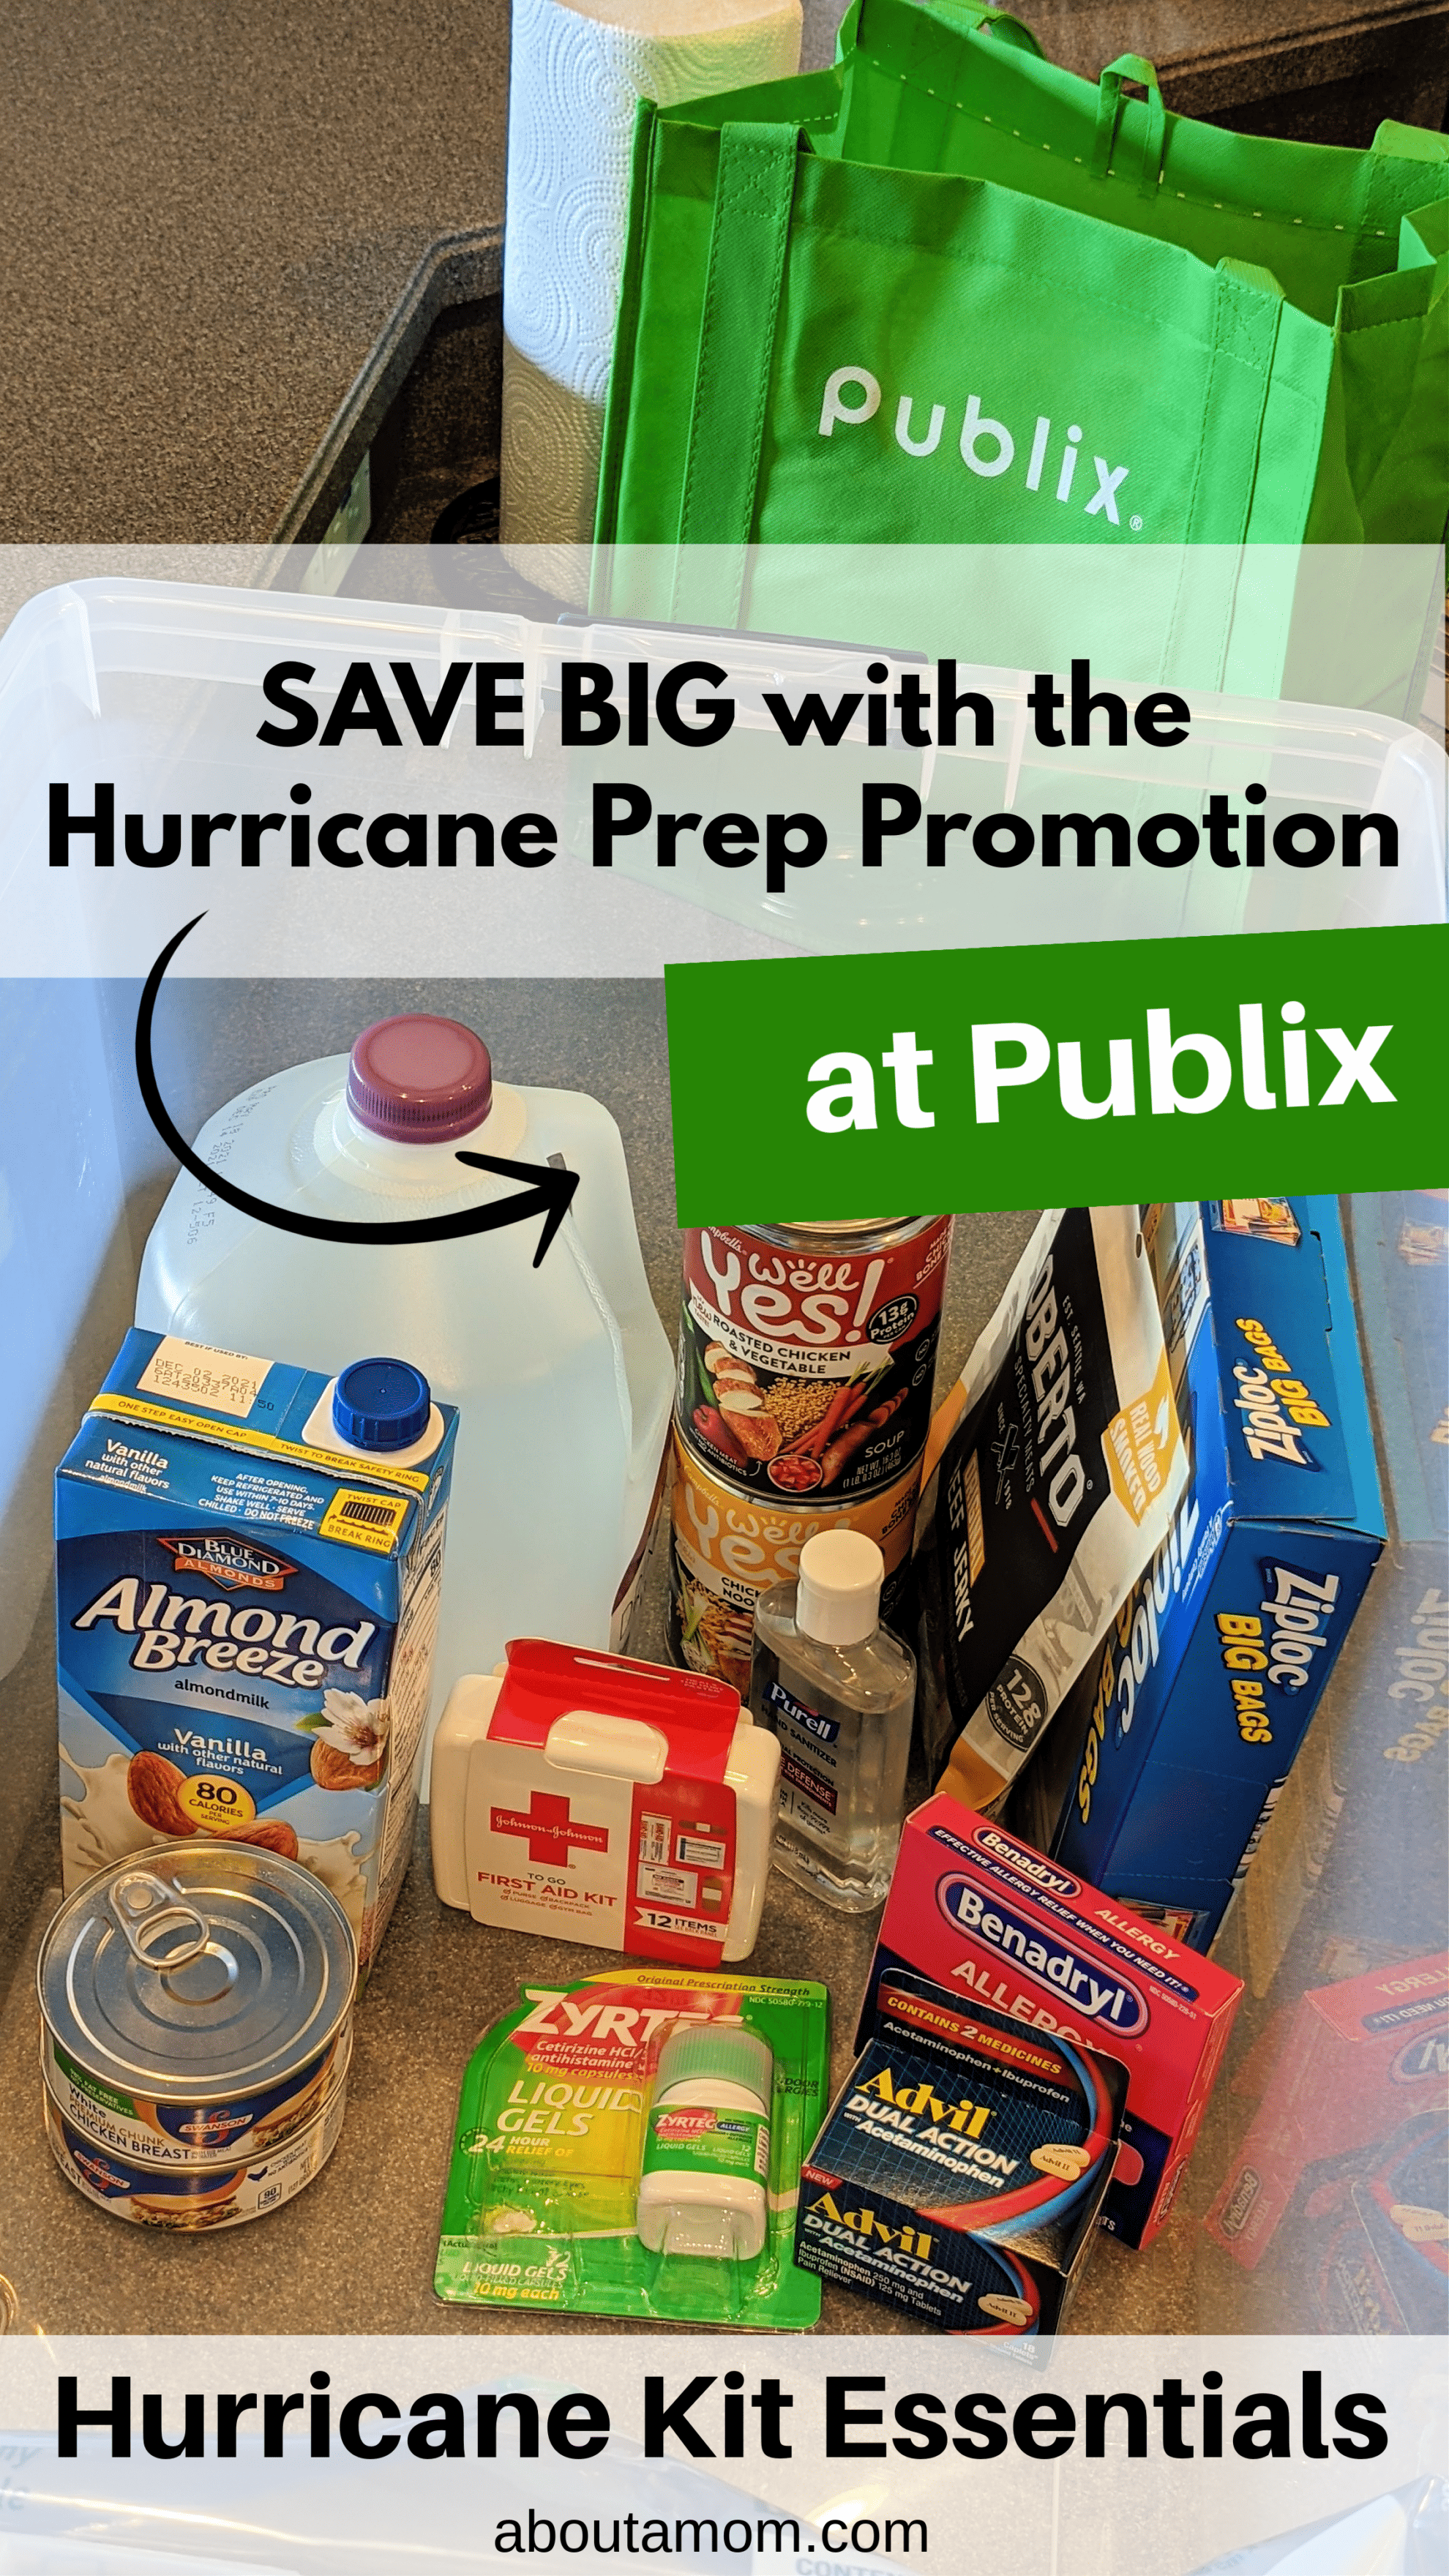 When it comes to disasters, having the right supplies can make a world of difference. Right now you can save big on your hurricane kit supplies during the Hurricane Prep promotion at Publix.